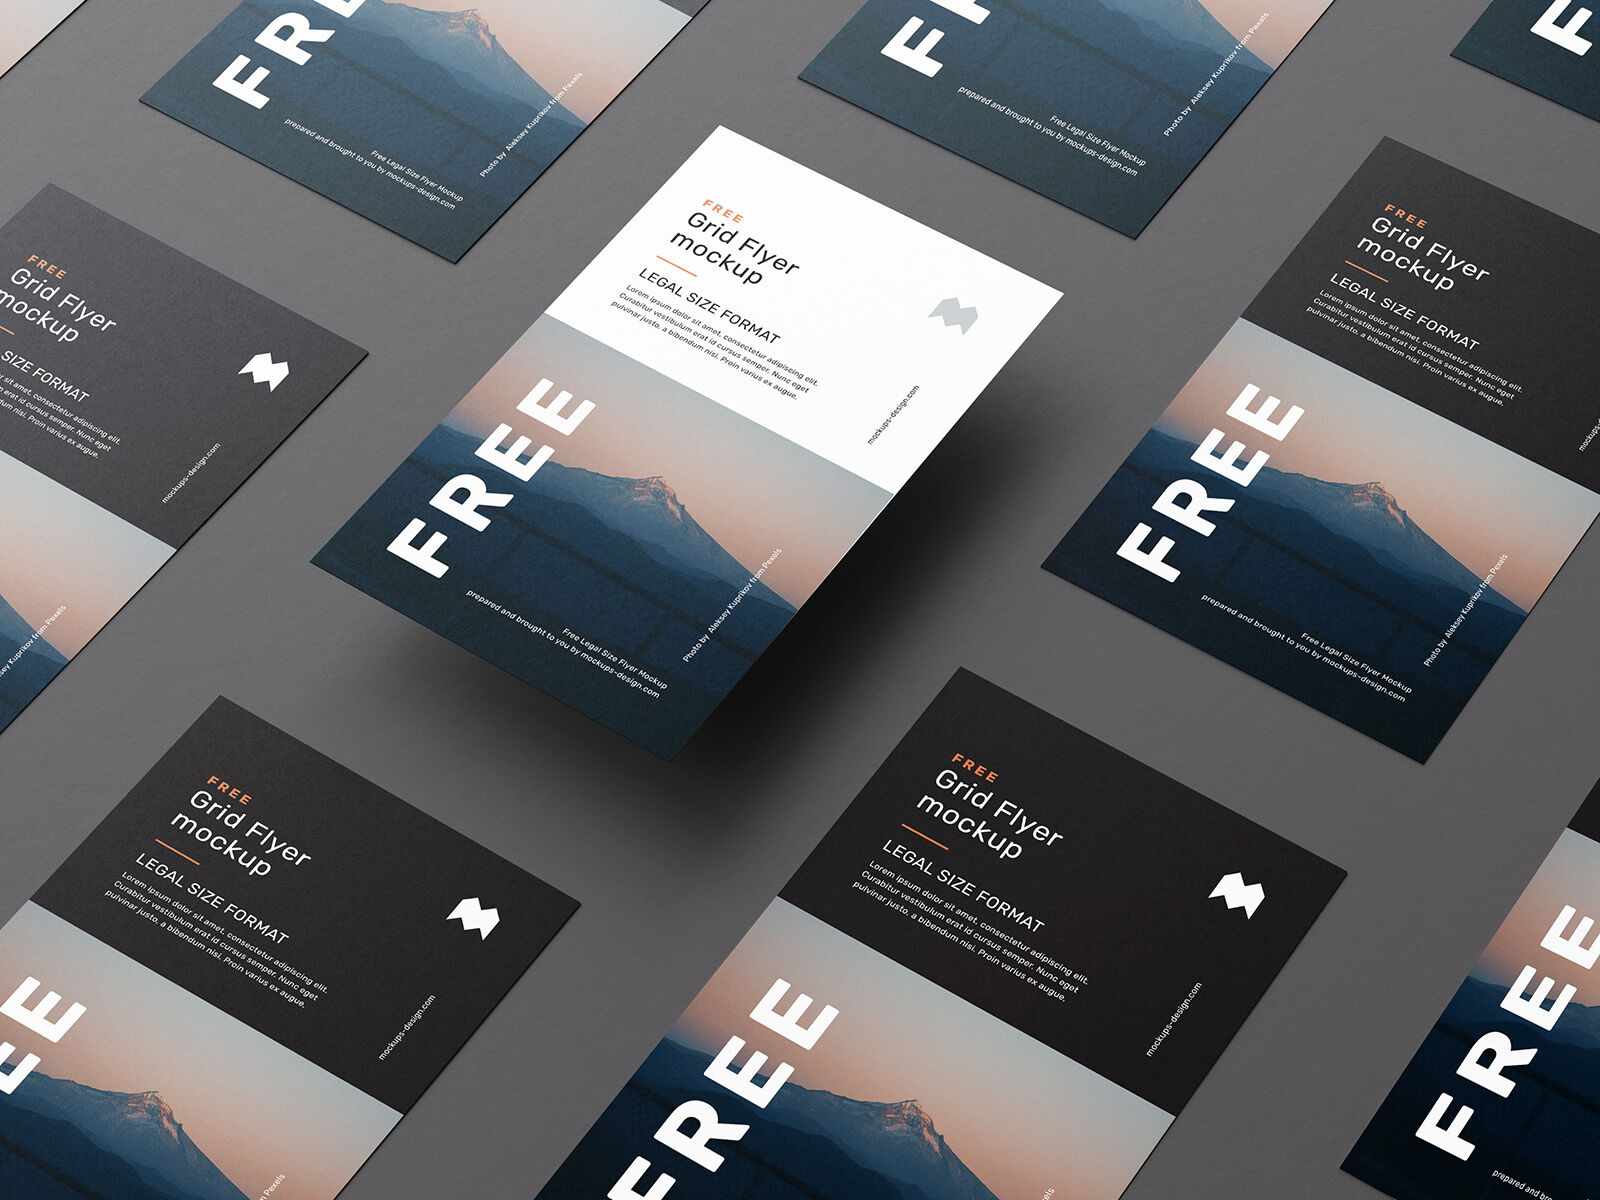 6 Grid Mockups of Flyers in Various Shots FREE PSD